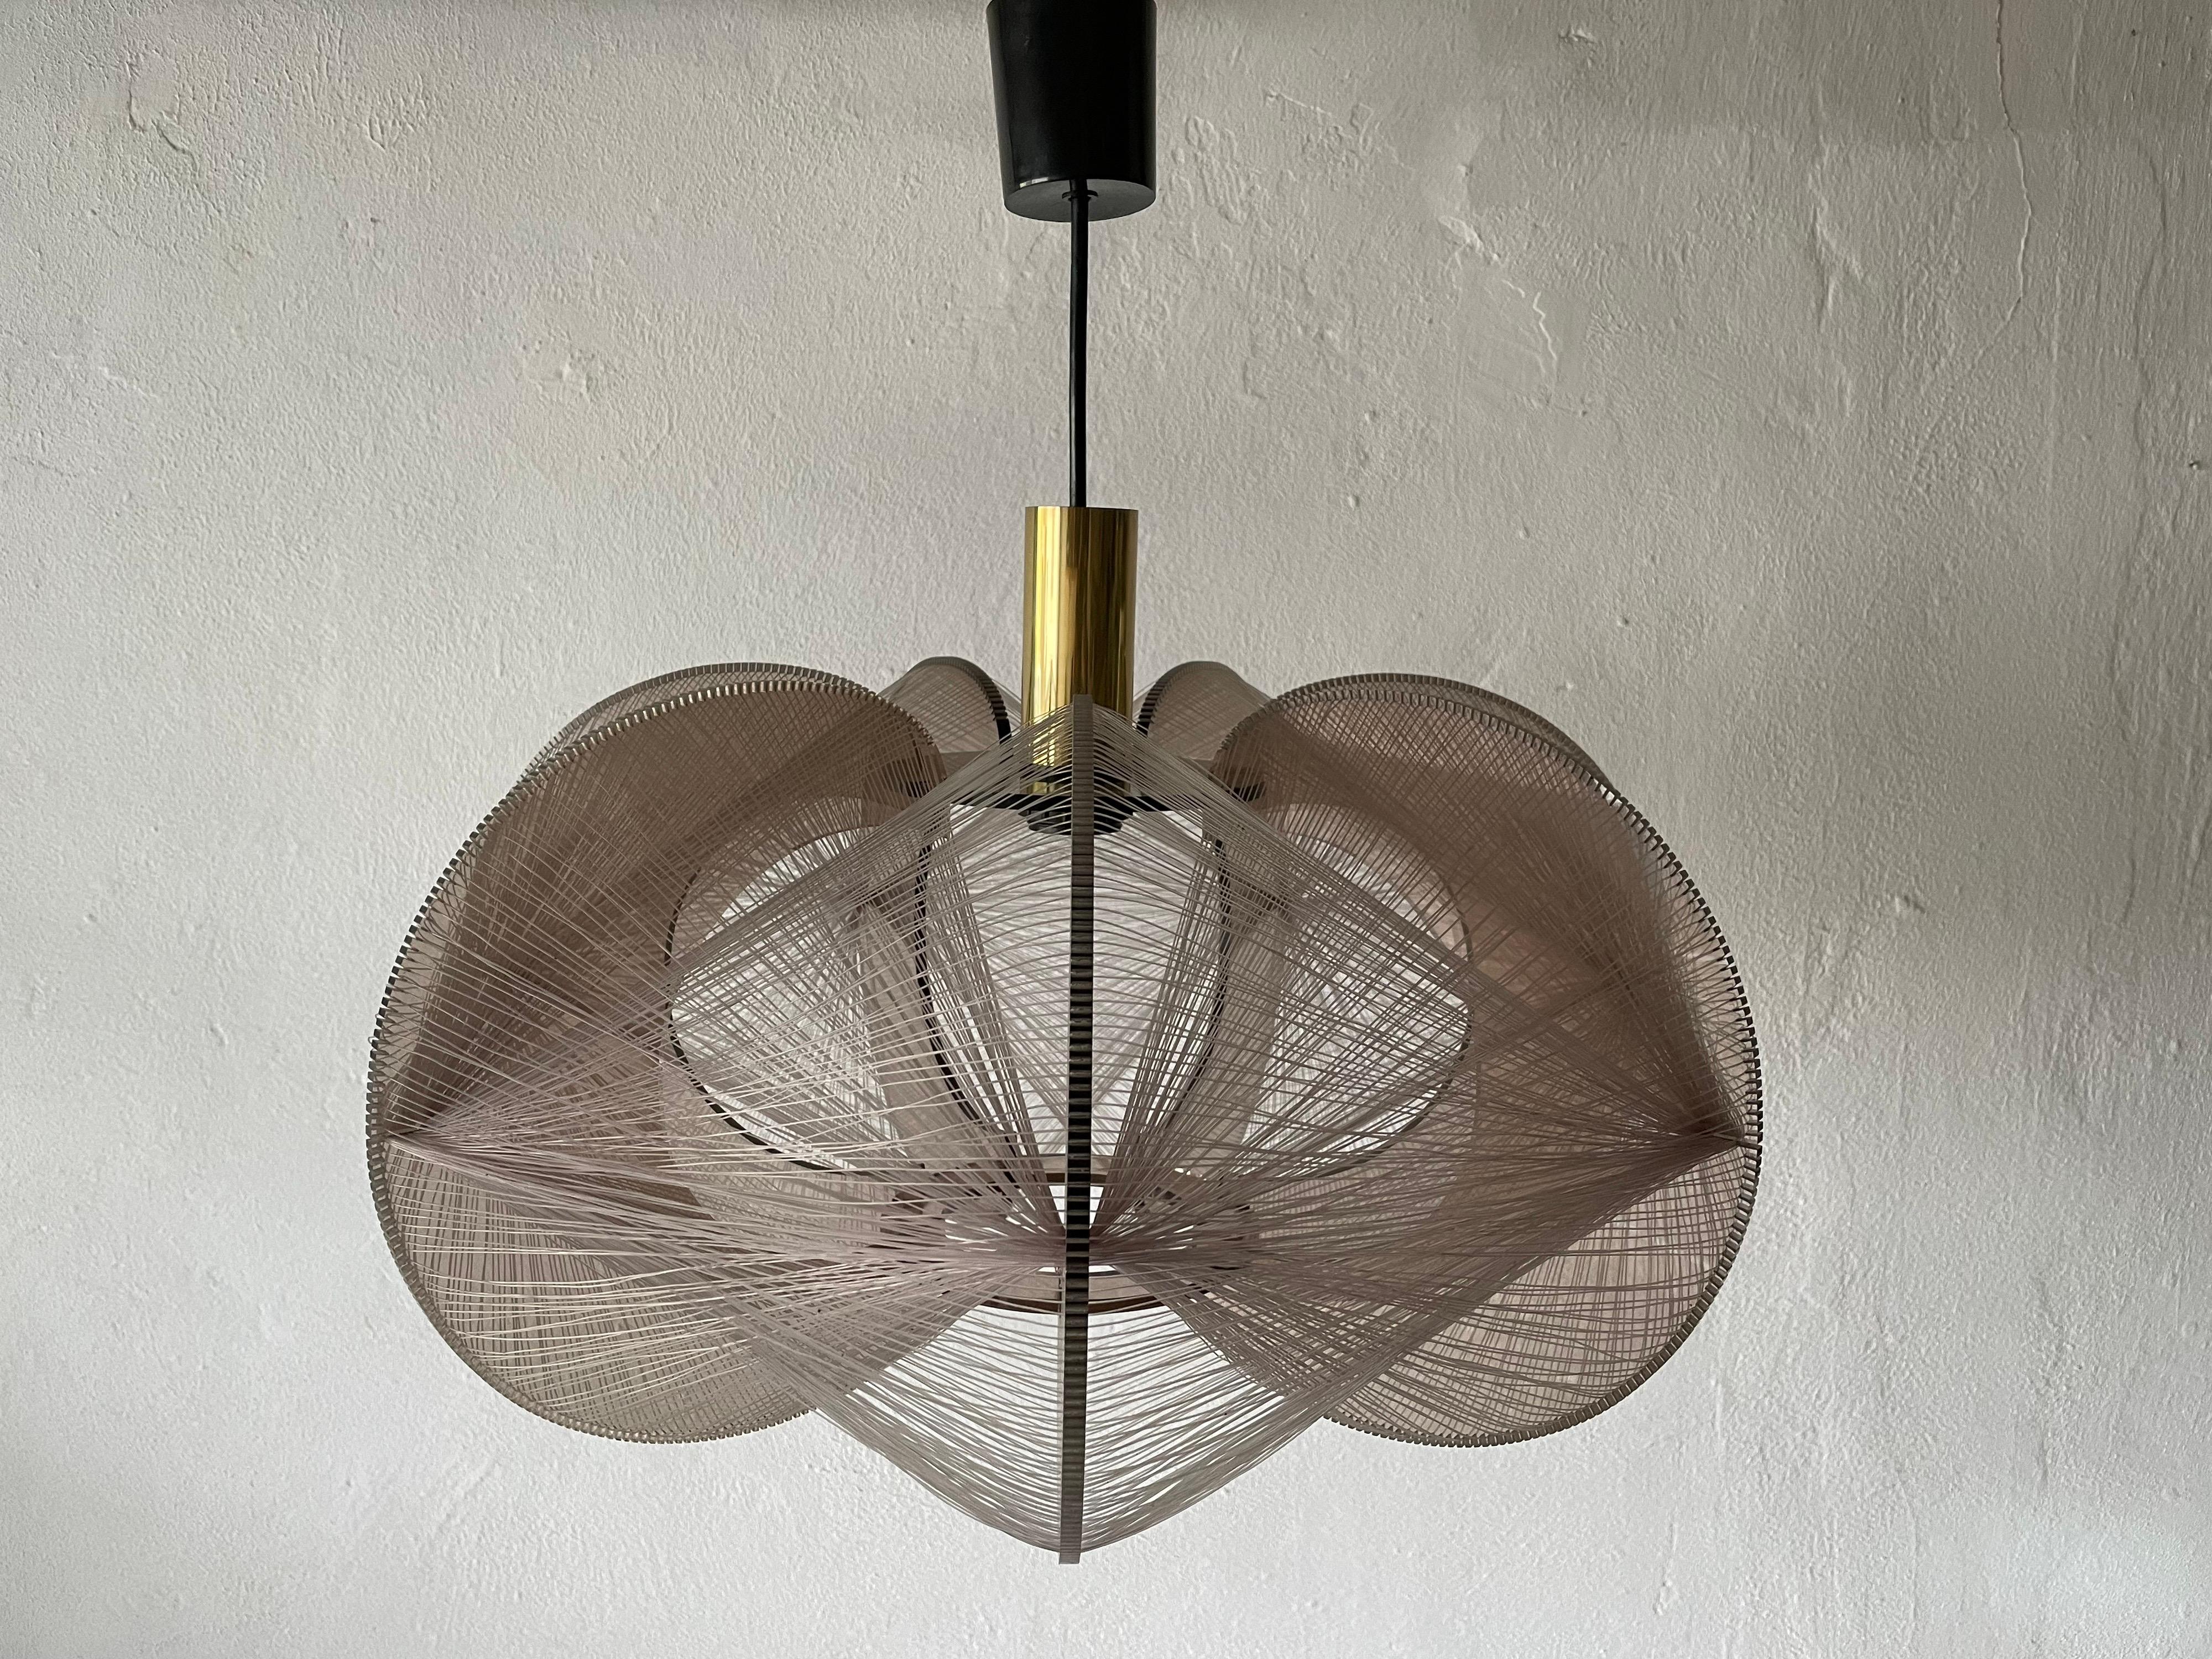 Plexiglass & wired pendant lamp by Paul Secon for Sompex, 1970s Germany
Elegant and minimal design hanging lamp

Lampshade is in good condition and very clean. 
This lamp works with E27 light bulb. Max 100W
Wired and suitable to use with 220V